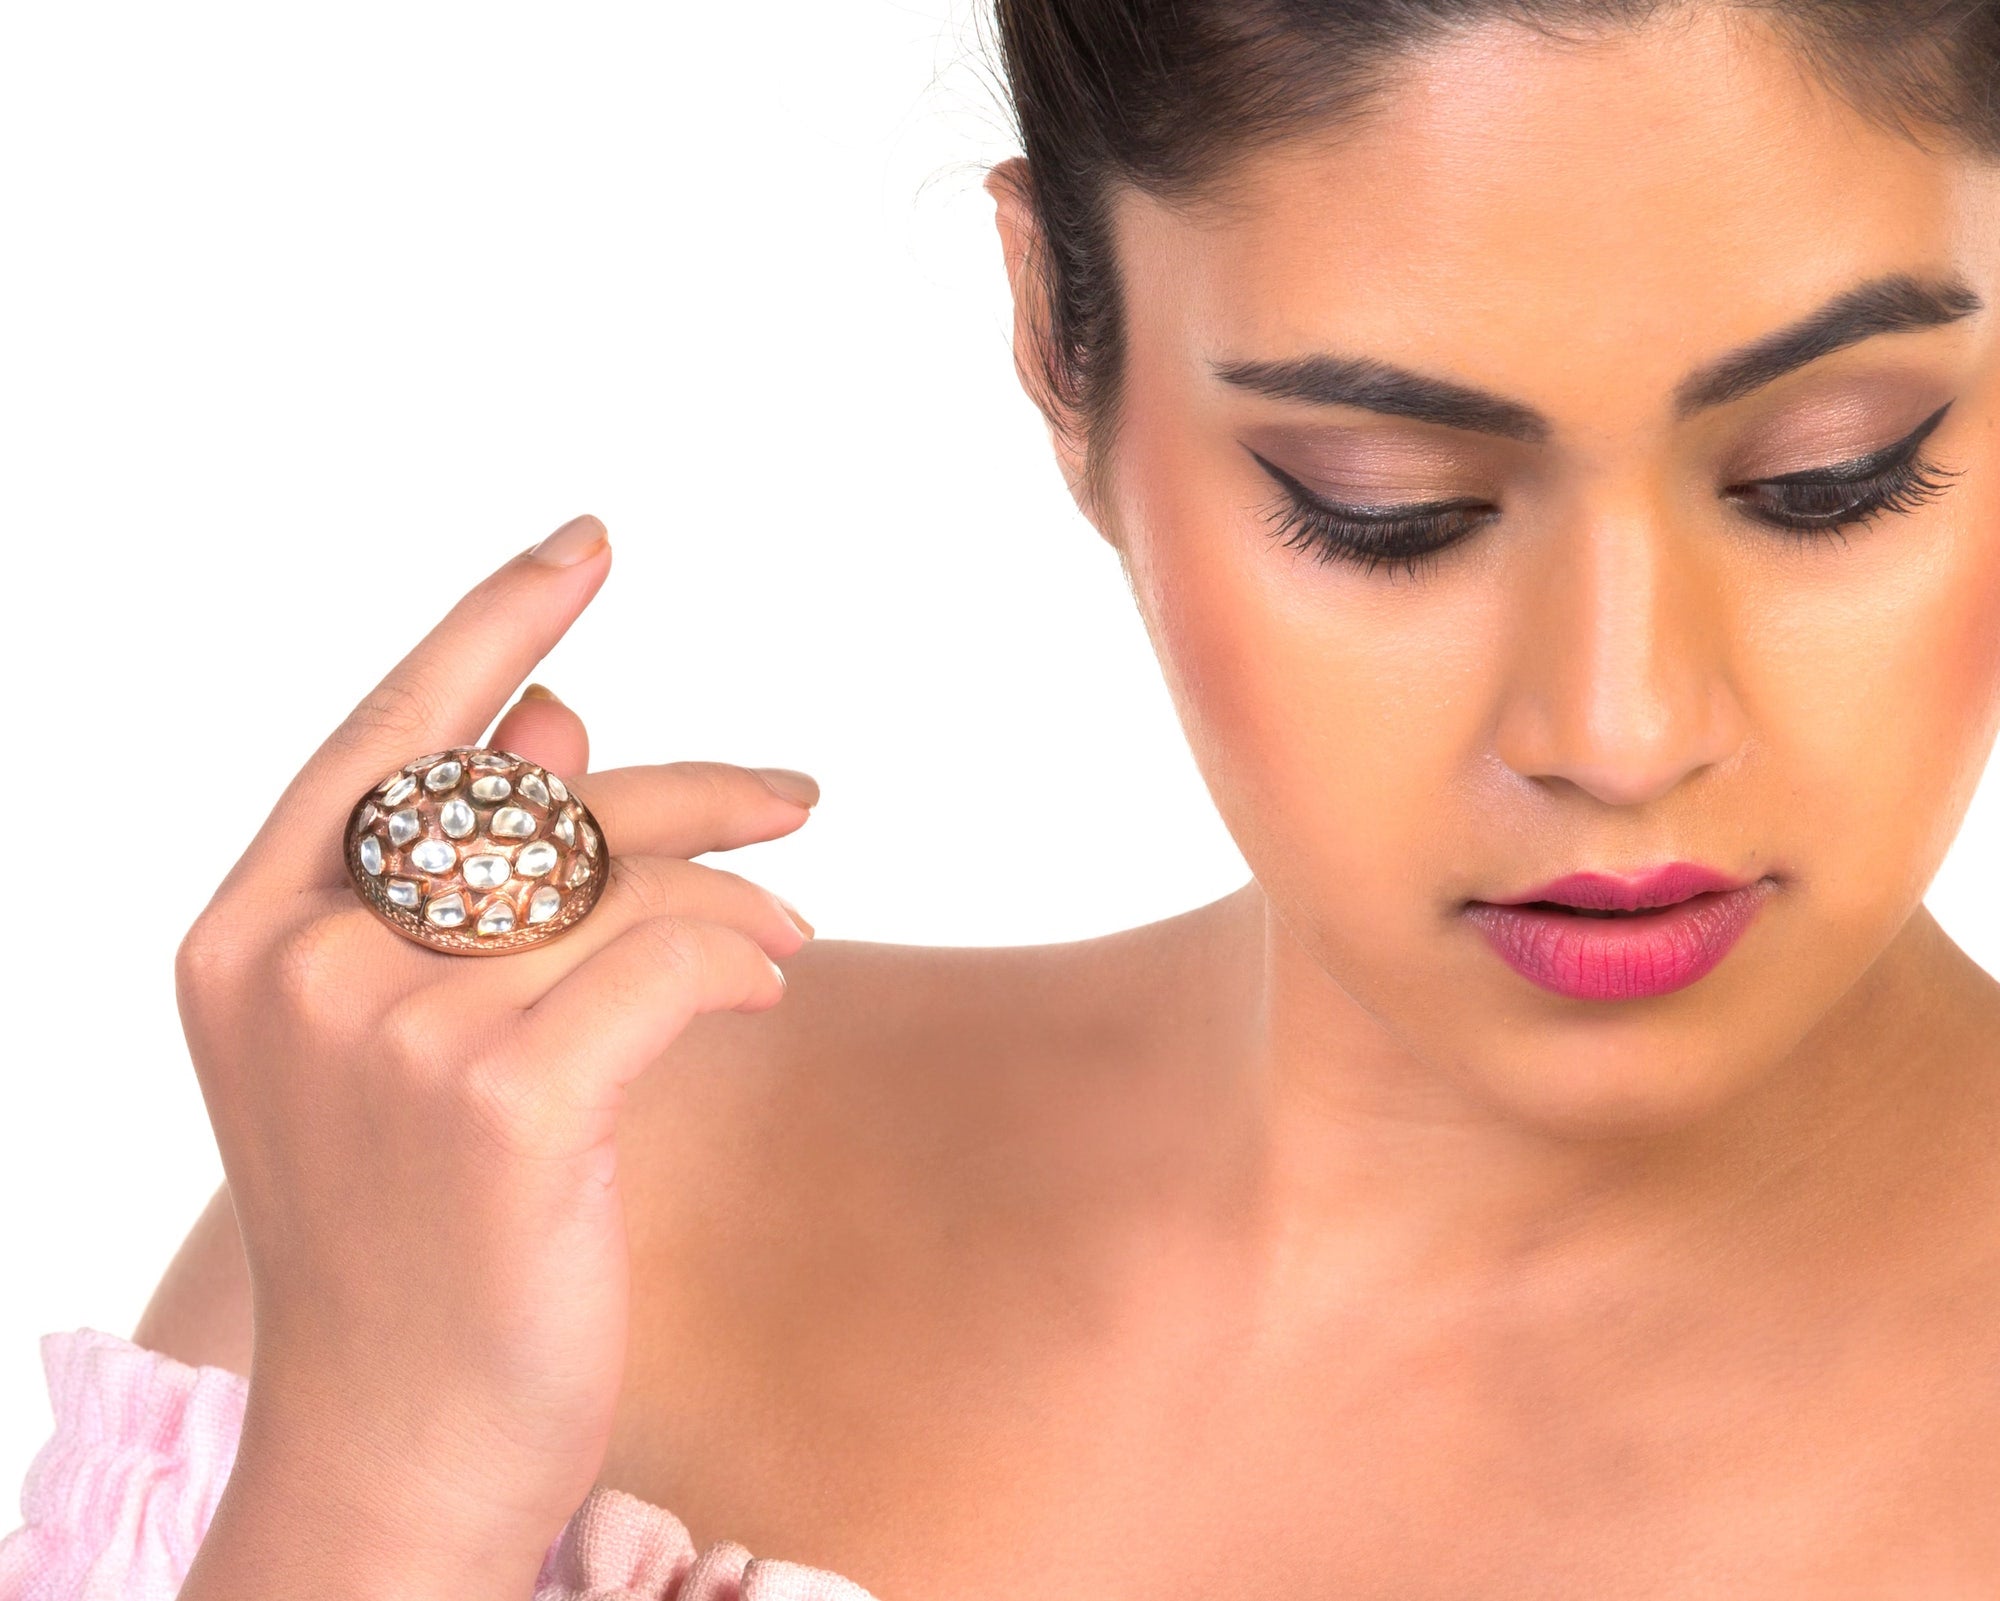 model with shiny dome finger ring